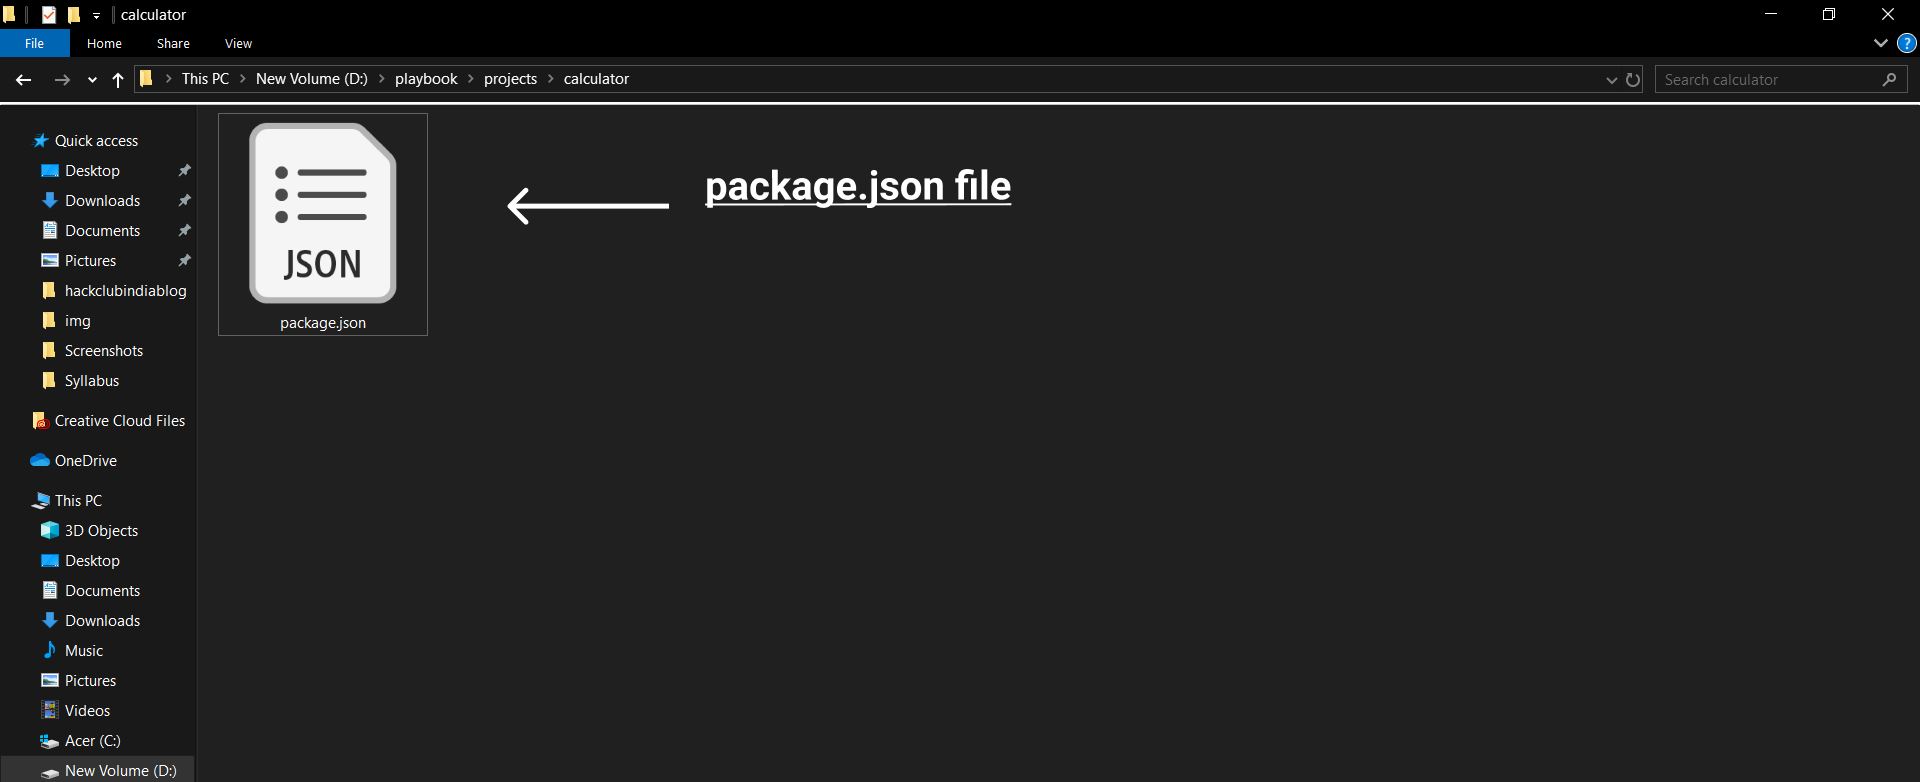 packagejsoncreated image